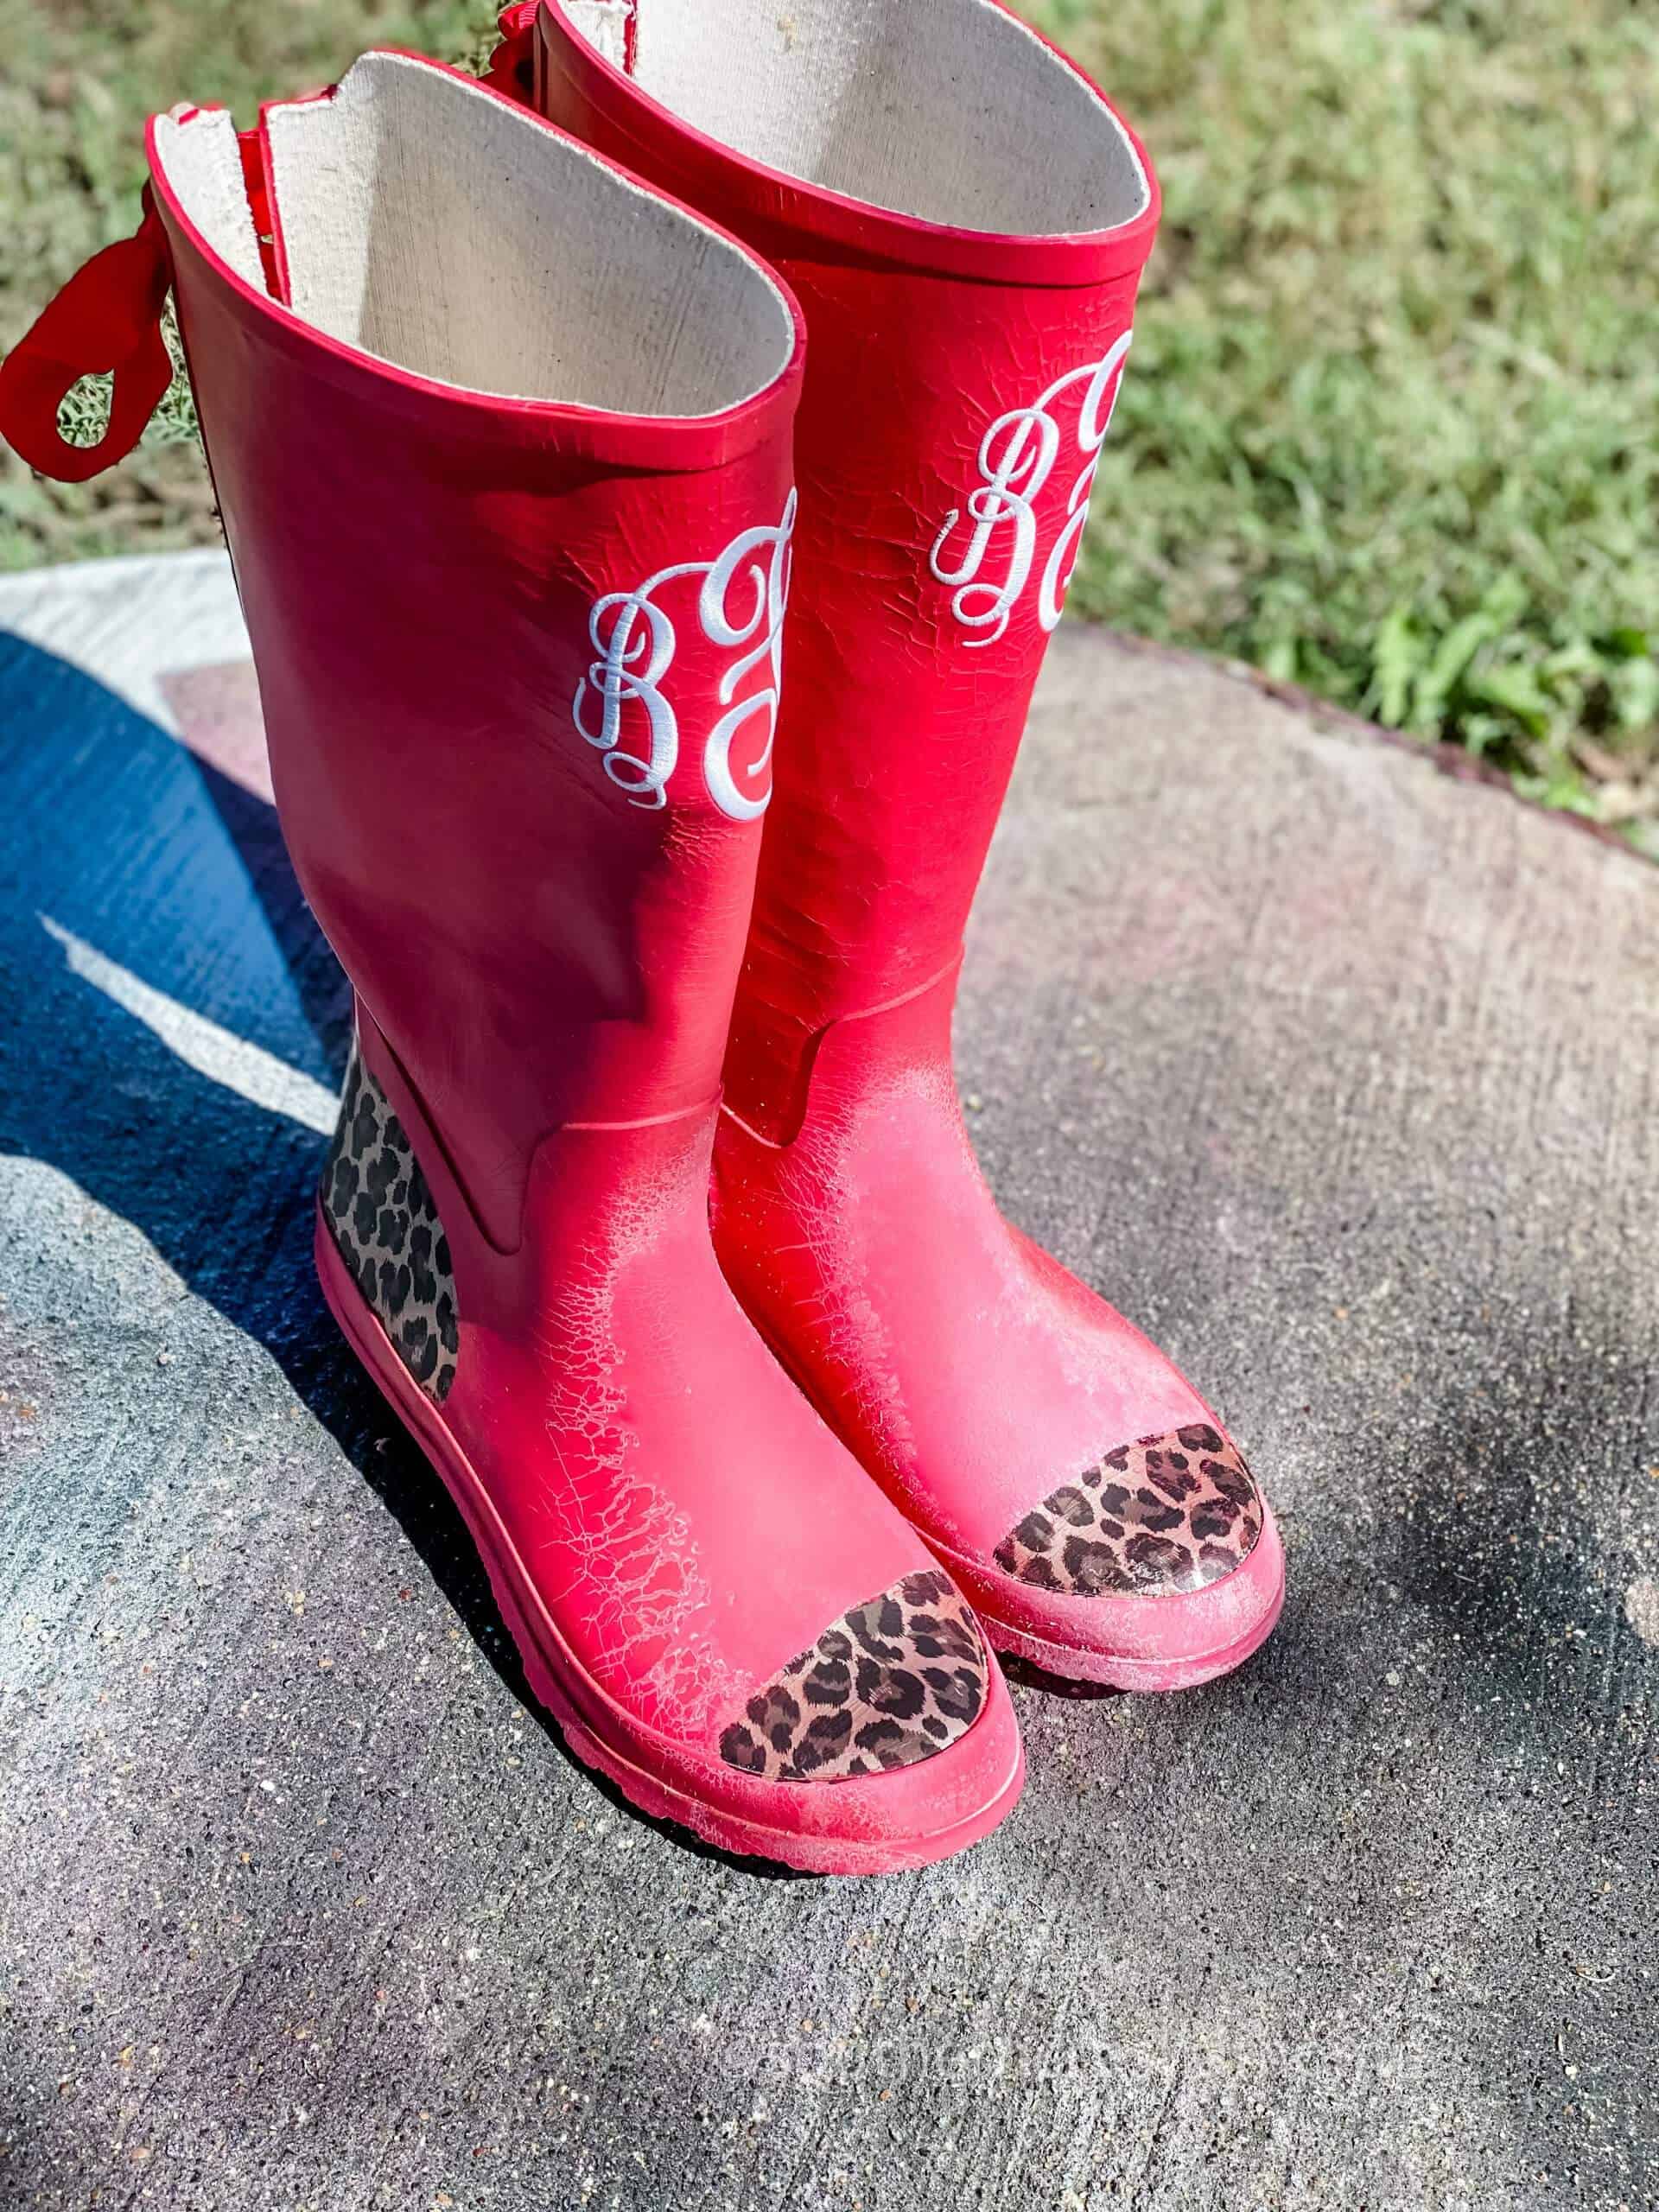 worn out rain boots